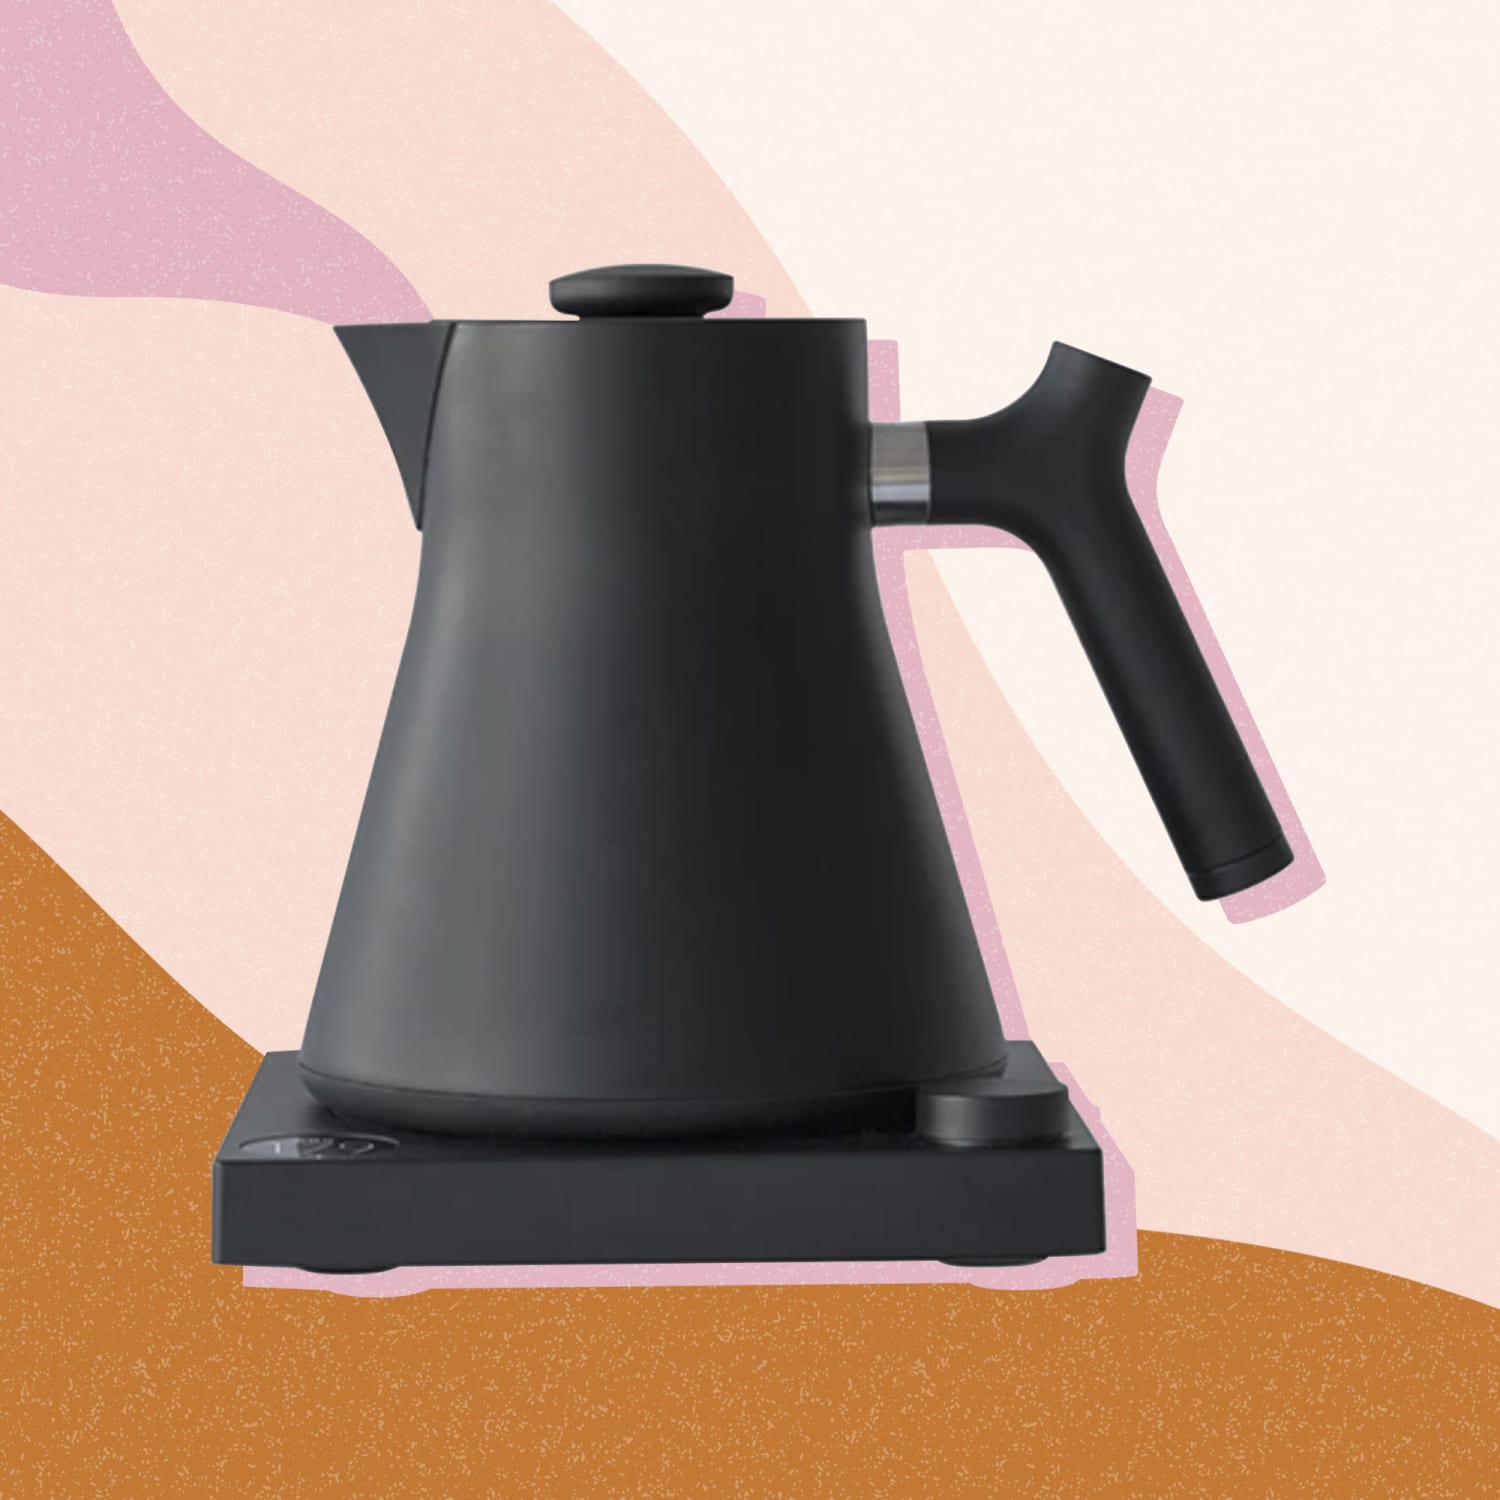 Fellow Stagg EKG Review: Is This Electric Kettle Worth The Money?